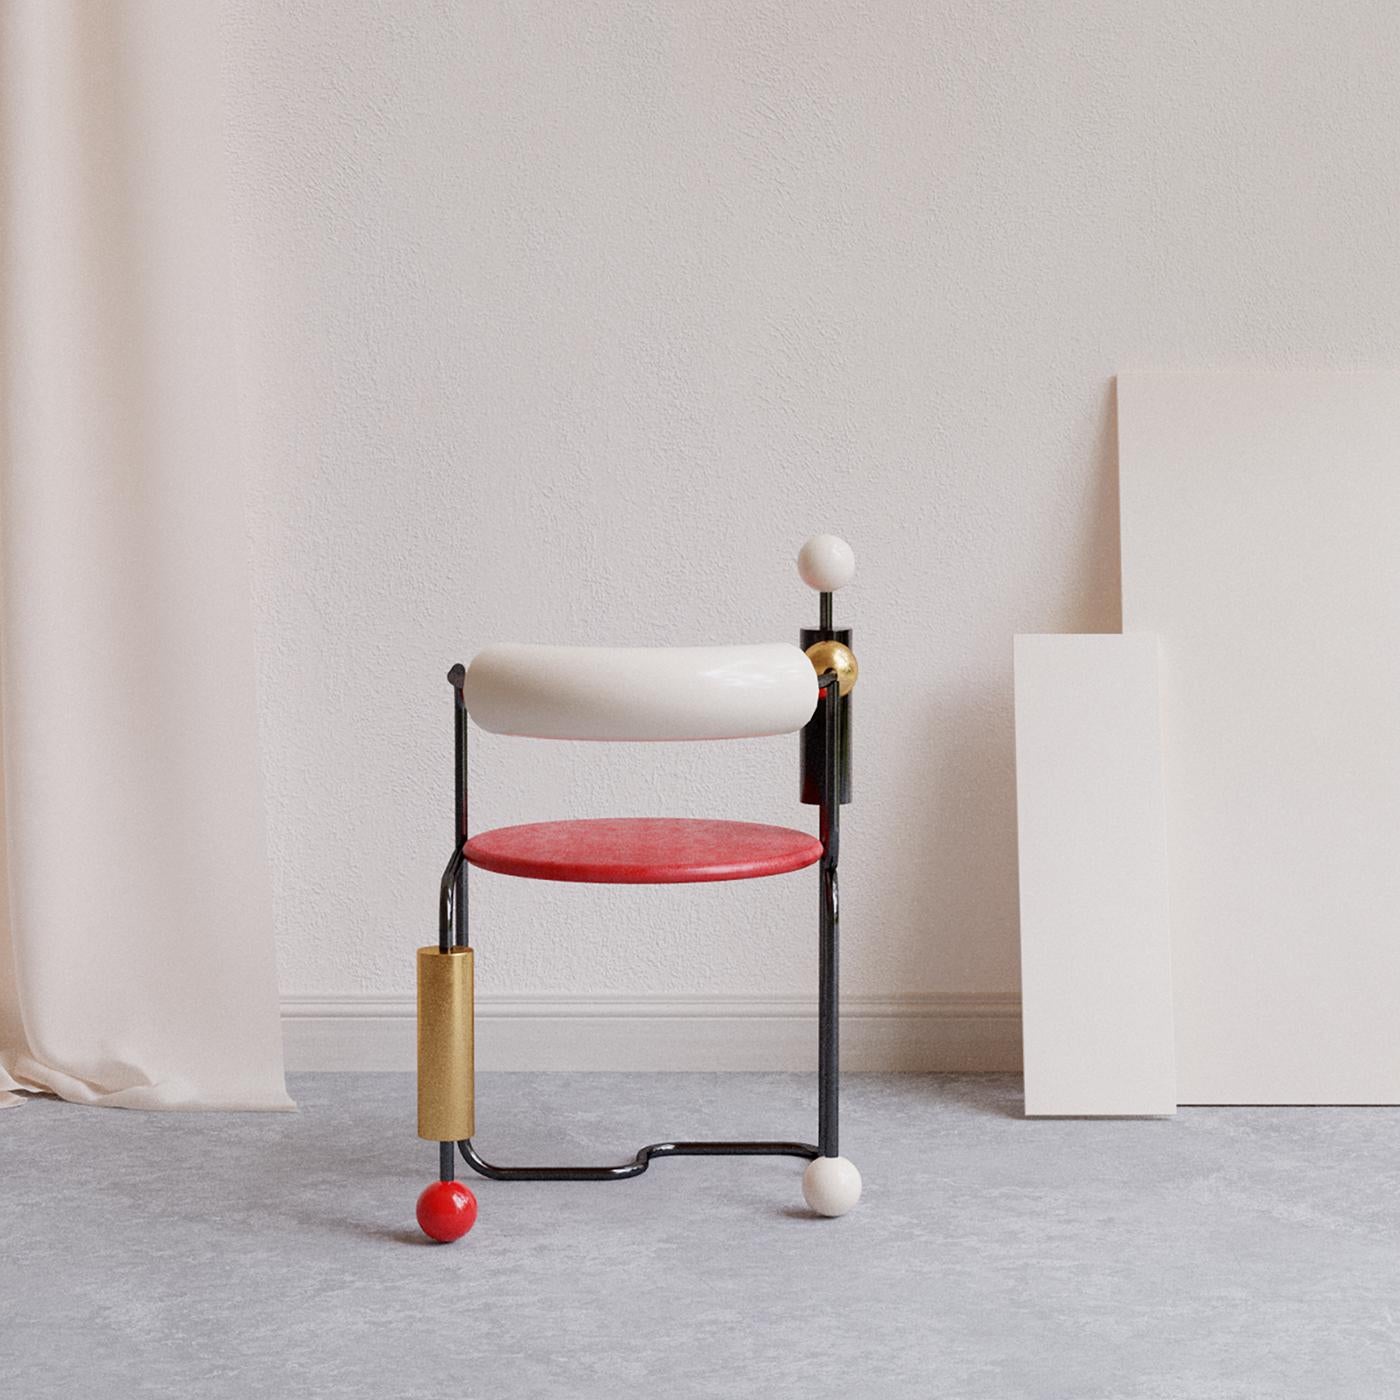 Whimsically inspired by Morse code, this chair from the eponymous series has its cylindrical black-lacquered steel frame adorned with geometric inserts finished in a combination of ivory, black, red, and gold. The airy design reveals a strong